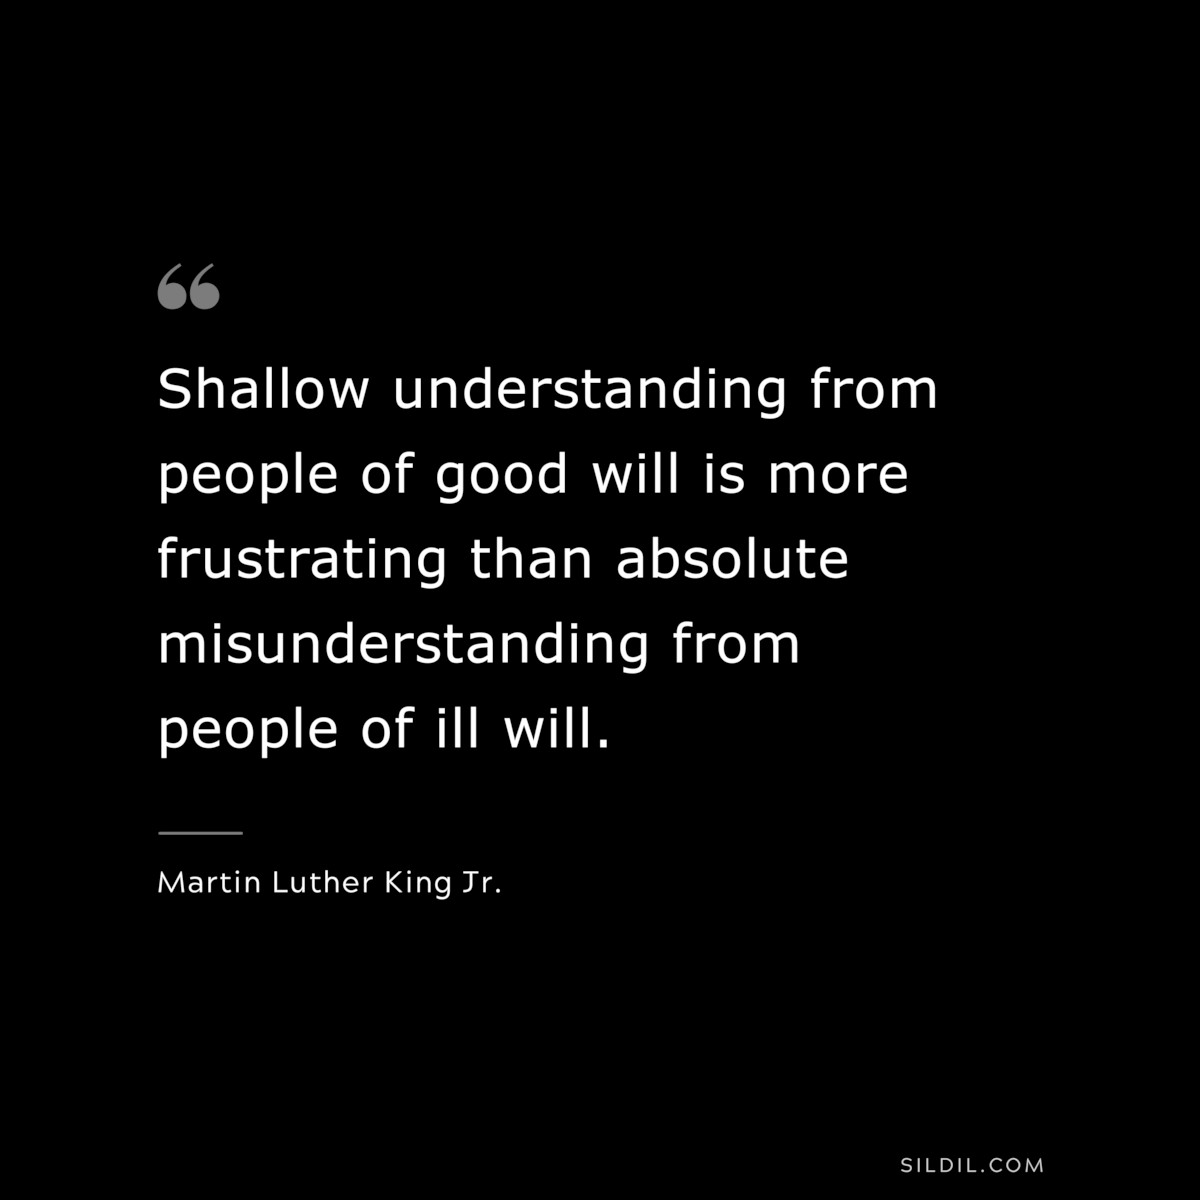 Shallow understanding from people of good will is more frustrating than absolute misunderstanding from people of ill will. ― Martin Luther King Jr.